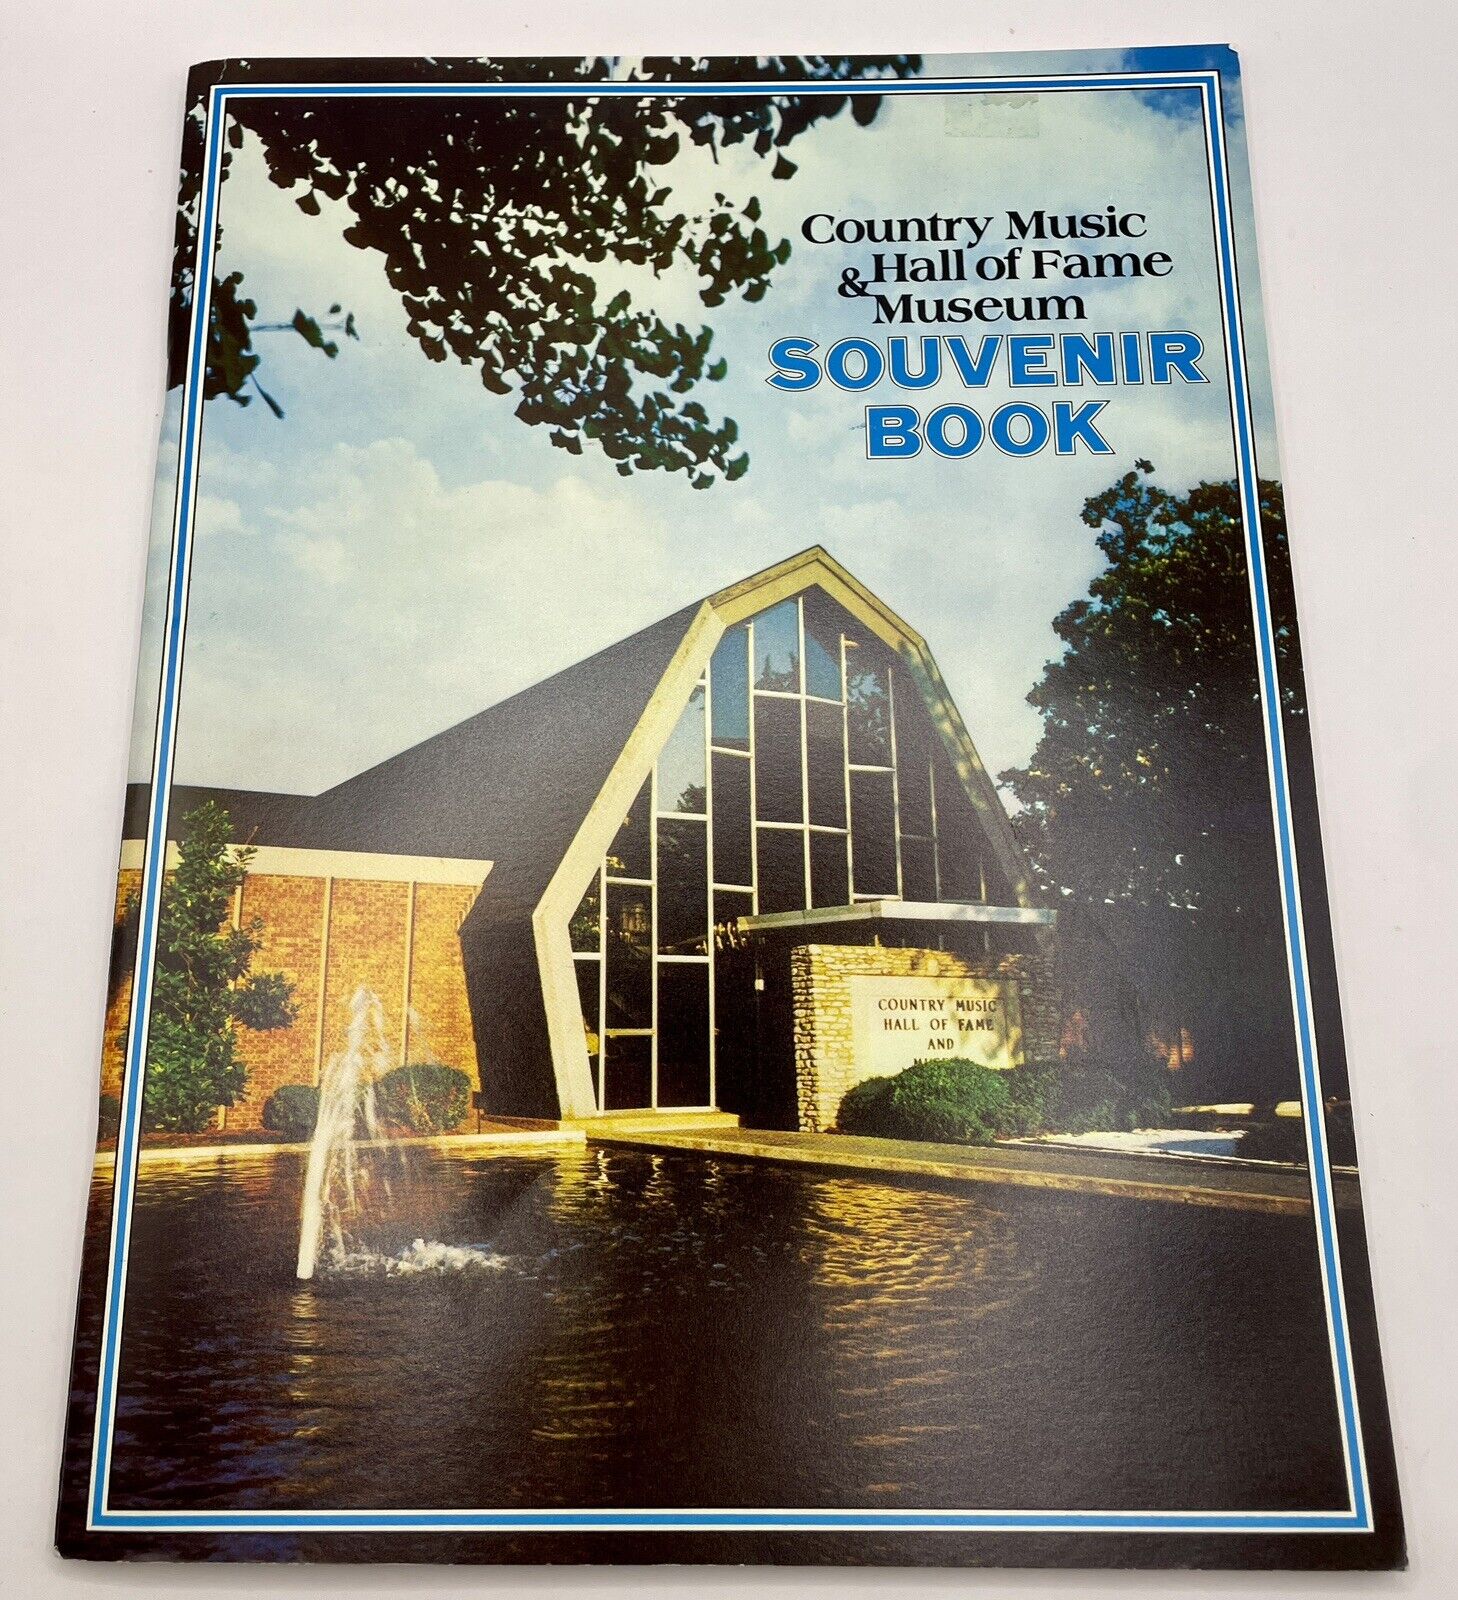 Vintage 1981 Country Music Hall Of Fame & Museum Souvenir Book